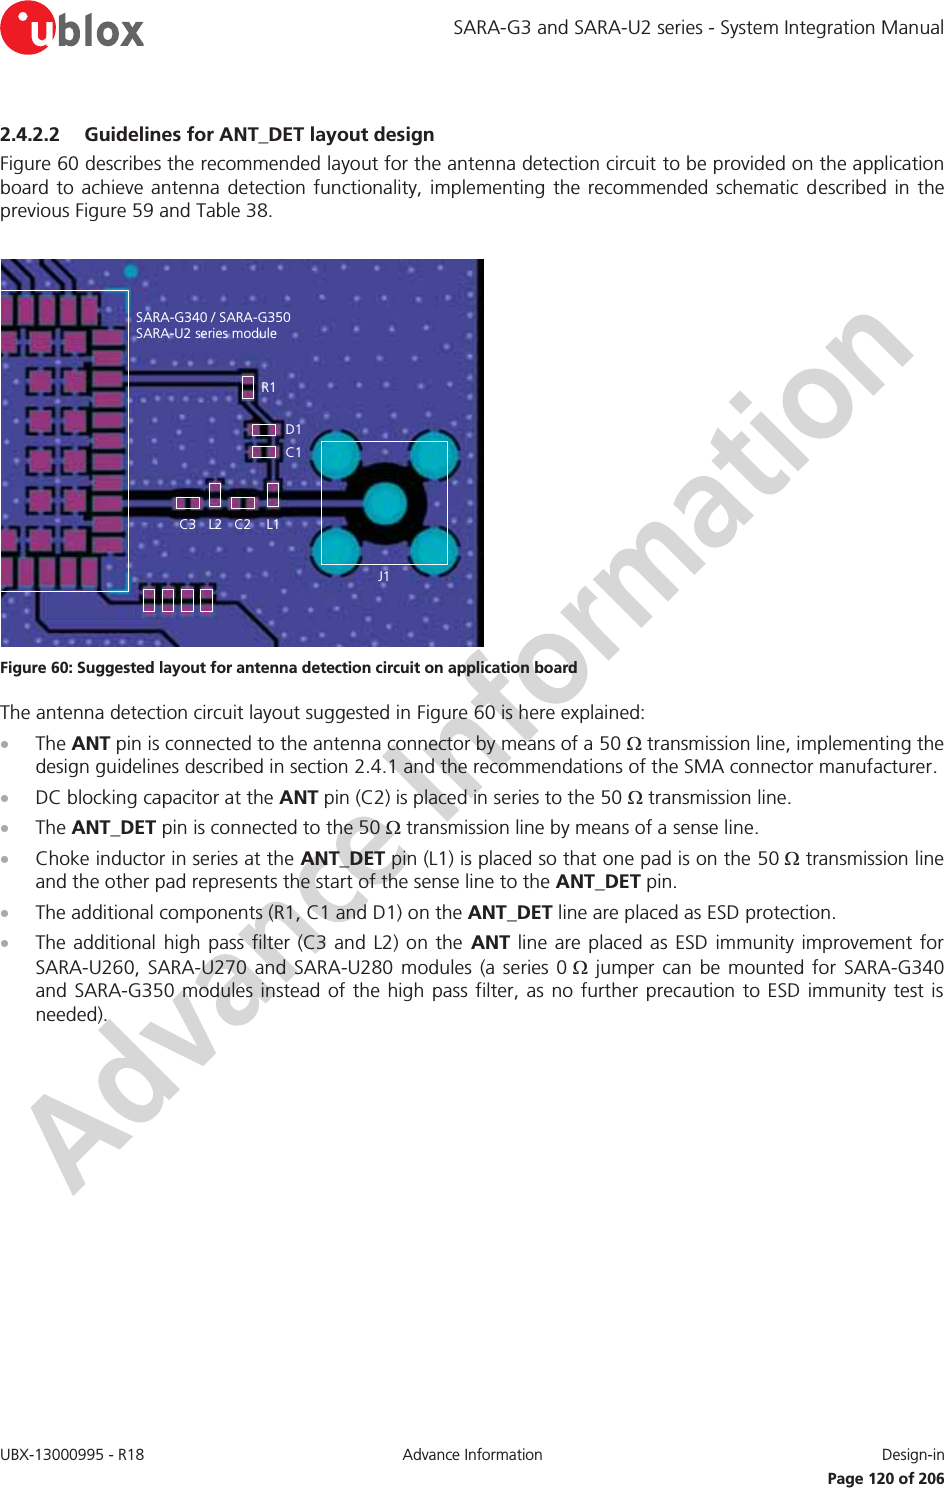 SARA-G3 and SARA-U2 series - System Integration Manual UBX-13000995 - R18  Advance Information  Design-in   Page 120 of 206 2.4.2.2 Guidelines for ANT_DET layout design Figure 60 describes the recommended layout for the antenna detection circuit to be provided on the application board to achieve antenna detection functionality, implementing the recommended schematic described in the previous Figure 59 and Table 38.  SARA-G340 / SARA-G350SARA-U2 series moduleC2R1D1C1L1J1C3 L2 Figure 60: Suggested layout for antenna detection circuit on application board  The antenna detection circuit layout suggested in Figure 60 is here explained: x The ANT pin is connected to the antenna connector by means of a 50 : transmission line, implementing the design guidelines described in section 2.4.1 and the recommendations of the SMA connector manufacturer. x DC blocking capacitor at the ANT pin (C2) is placed in series to the 50 : transmission line. x The ANT_DET pin is connected to the 50 : transmission line by means of a sense line. x Choke inductor in series at the ANT_DET pin (L1) is placed so that one pad is on the 50 : transmission line and the other pad represents the start of the sense line to the ANT_DET pin. x The additional components (R1, C1 and D1) on the ANT_DET line are placed as ESD protection. x The additional high pass filter (C3 and L2) on the ANT line are placed as ESD immunity improvement for SARA-U260, SARA-U270 and SARA-U280 modules (a series 0 : jumper can be mounted for SARA-G340 and SARA-G350 modules instead of the high pass filter, as no further precaution to ESD immunity test is needed).  